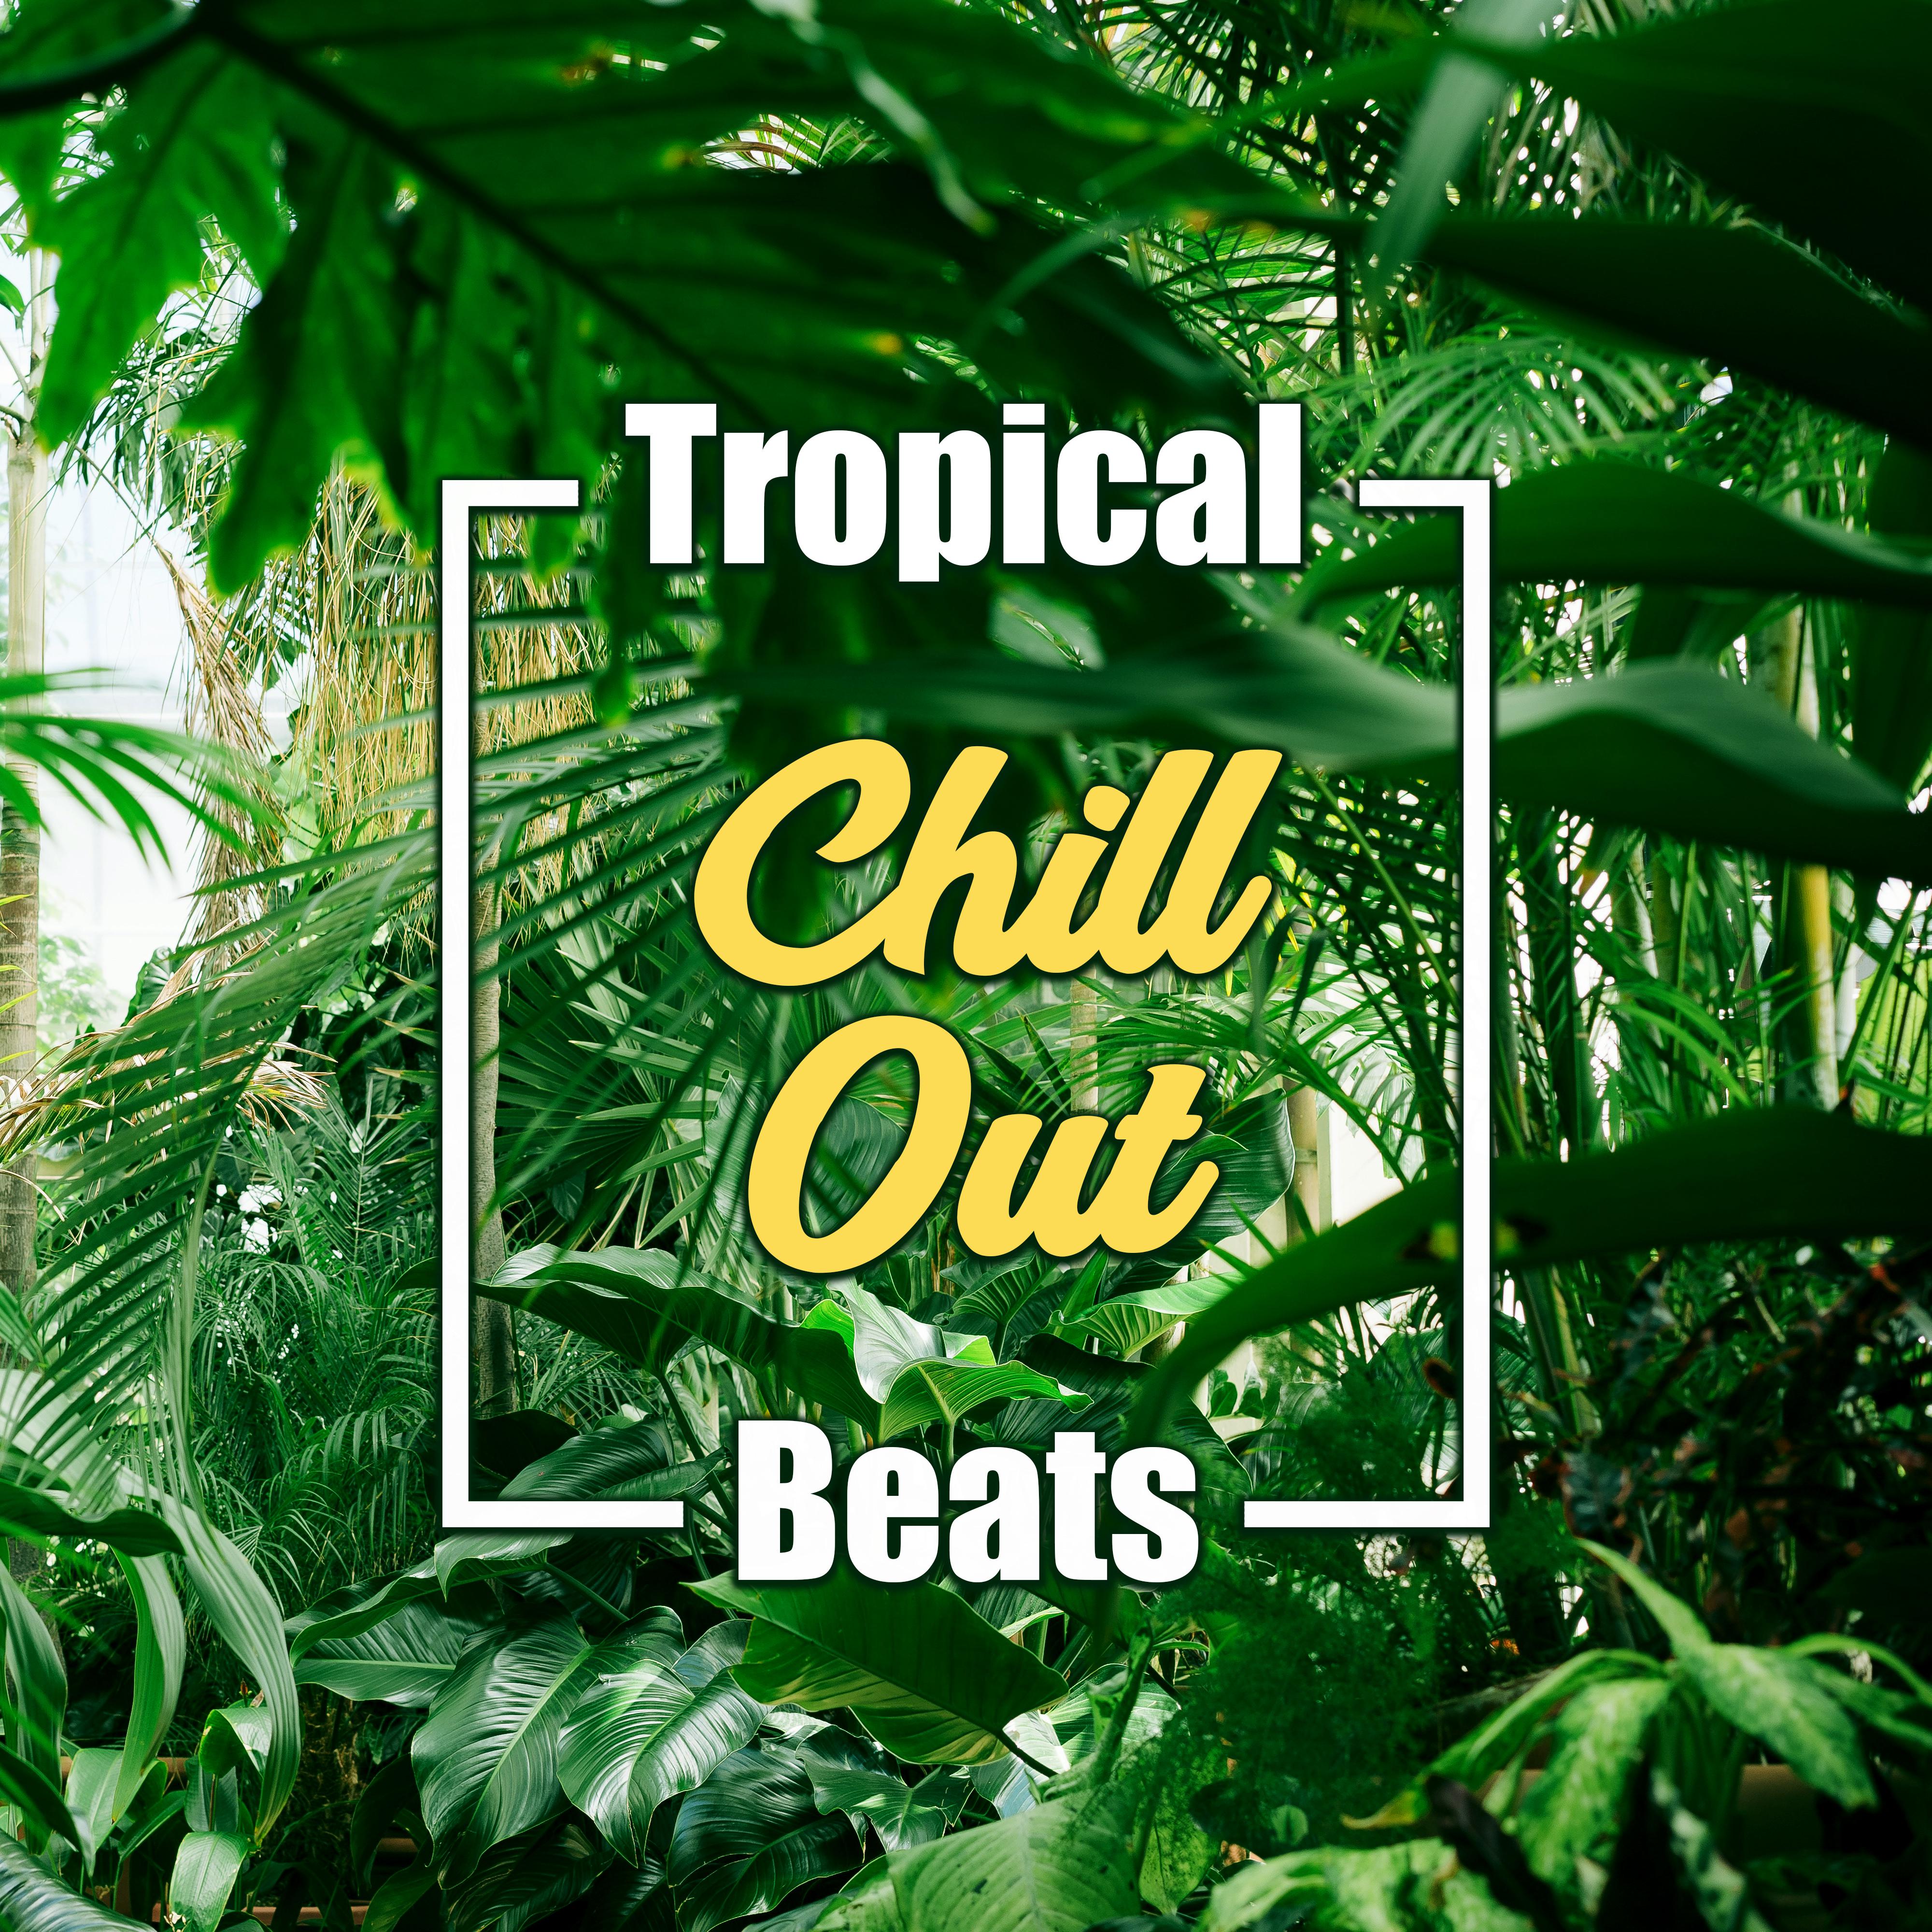 Tropical Chill Out Beats – Summer Rest, Chill Out 2017, Holiday Music, Beach Relaxation, Sunrise Songs